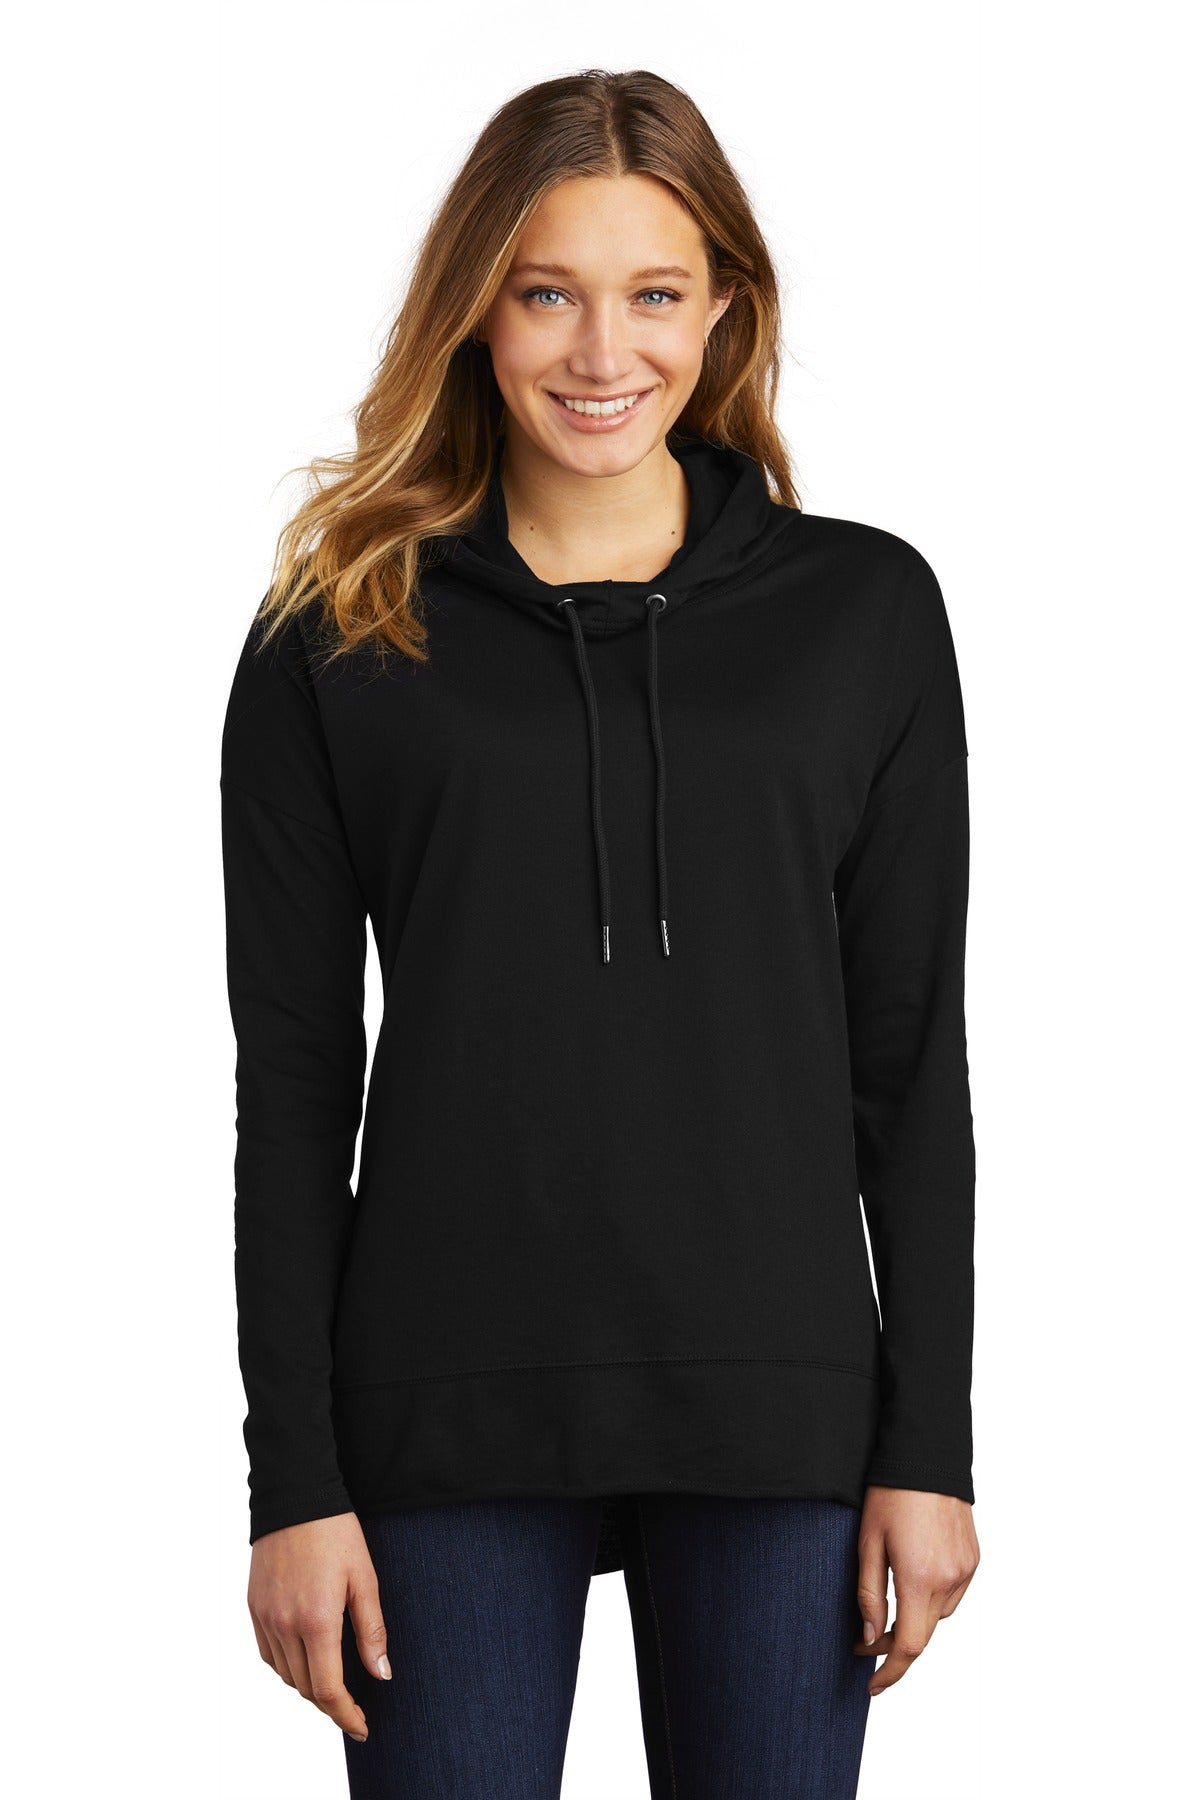 District ® Women's Featherweight French Terry ™ Hoodie DT671 - DFW Impression